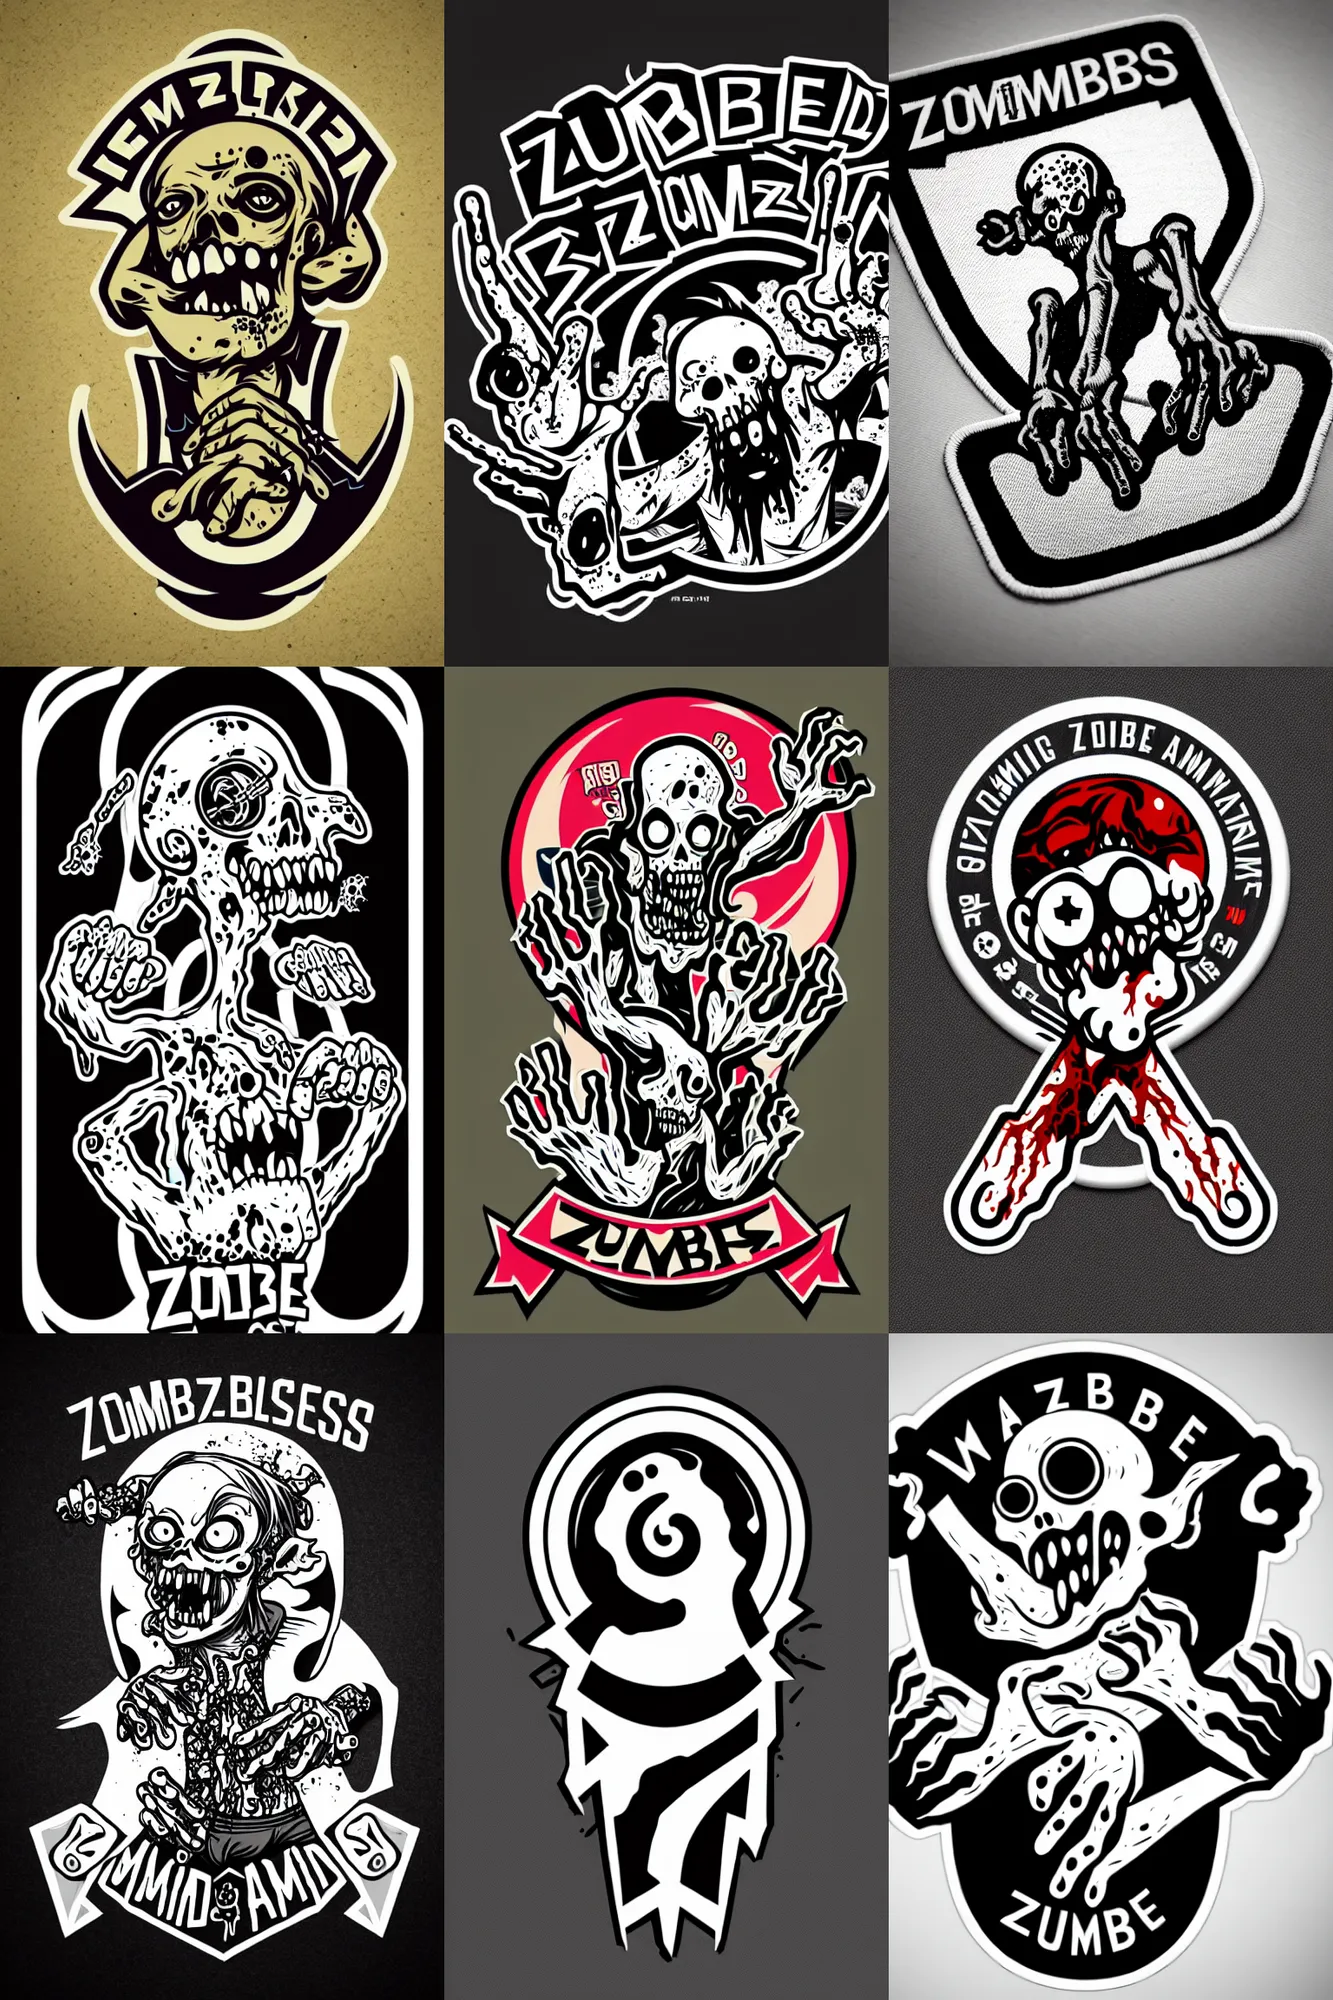 Prompt: logo design, zombie arms out in front, patch logo, by mcbess, high detail spiral design